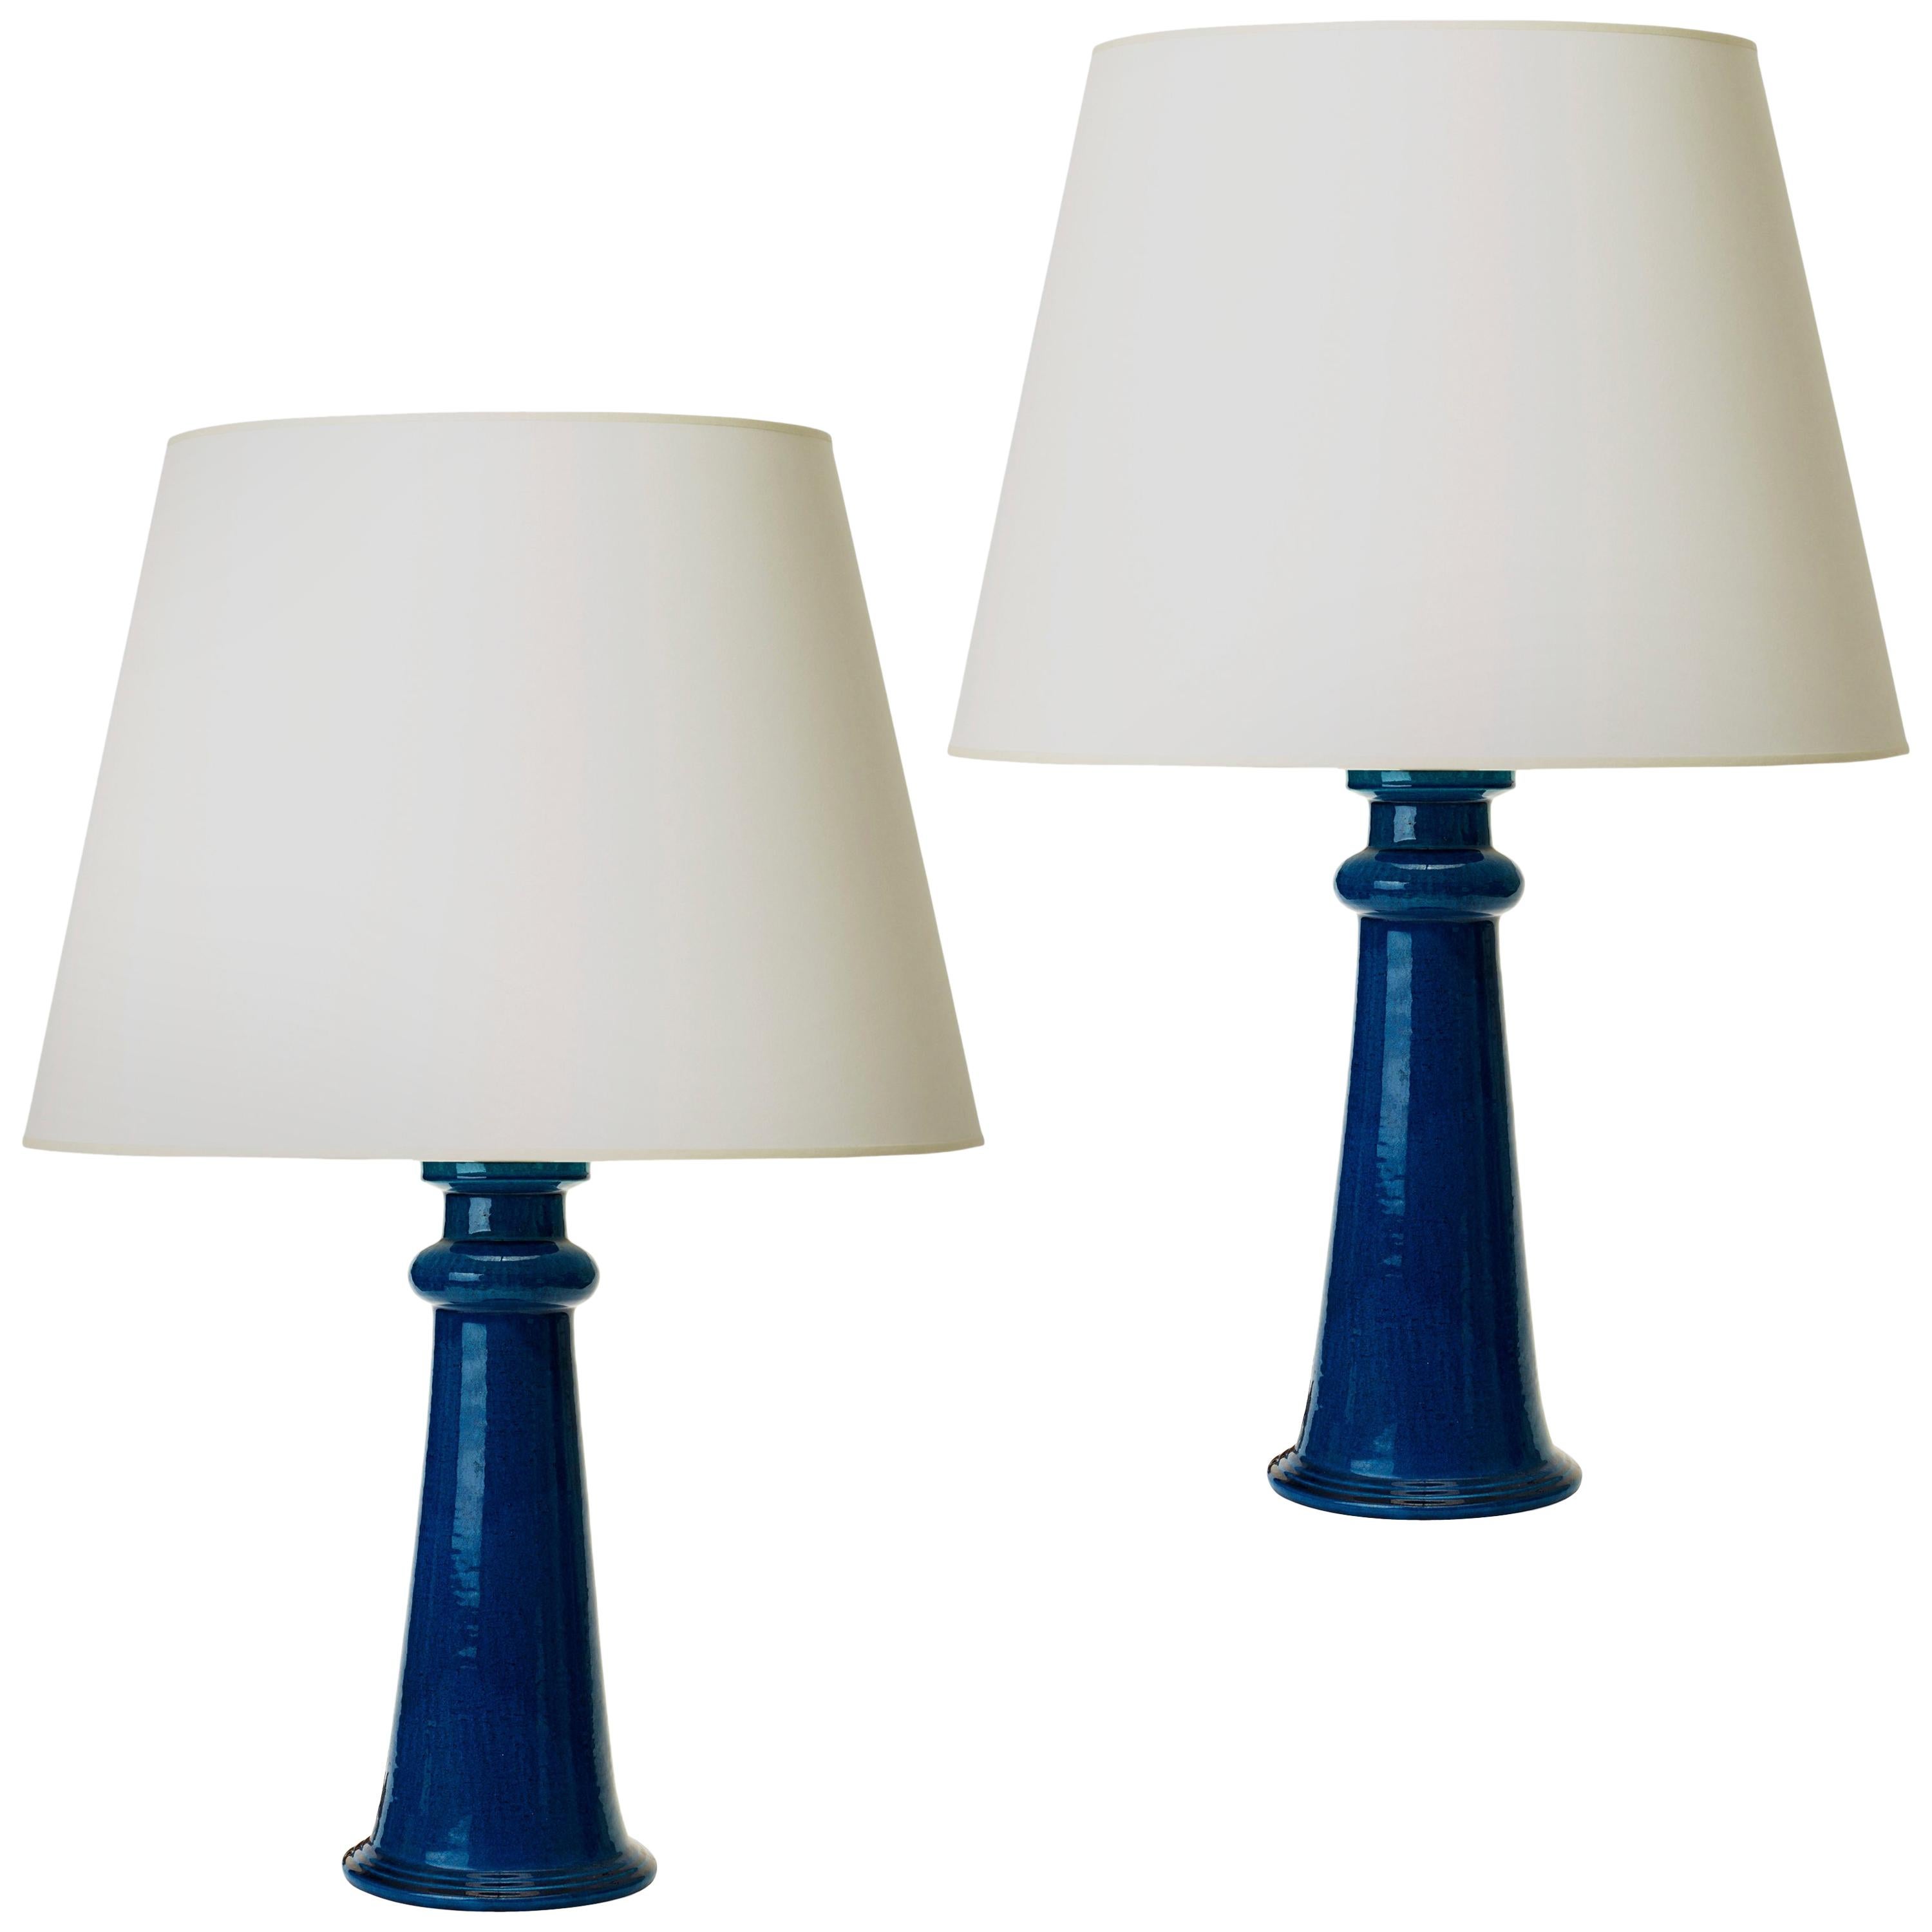 Spectacular Monumental Pair of Table Lamps in a Saturated Azure by Nils Kähler im Angebot